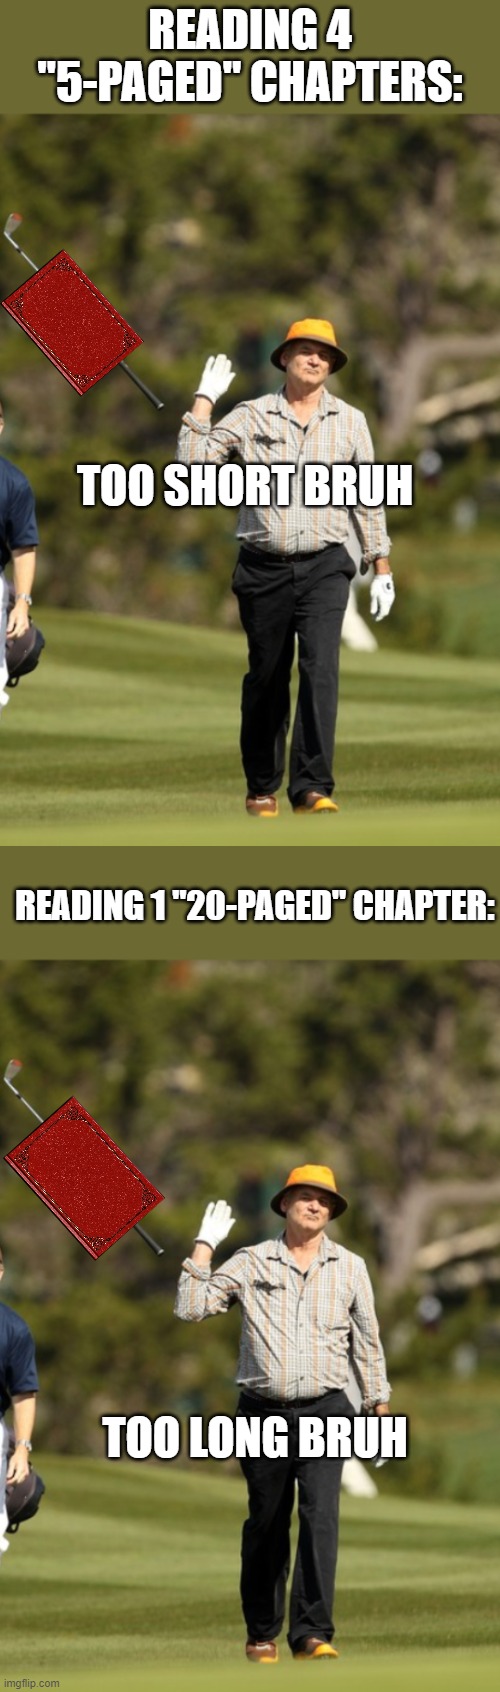 Books be like | READING 4 "5-PAGED" CHAPTERS:; TOO SHORT BRUH; READING 1 "20-PAGED" CHAPTER:; TOO LONG BRUH | image tagged in books,bill murray golf | made w/ Imgflip meme maker